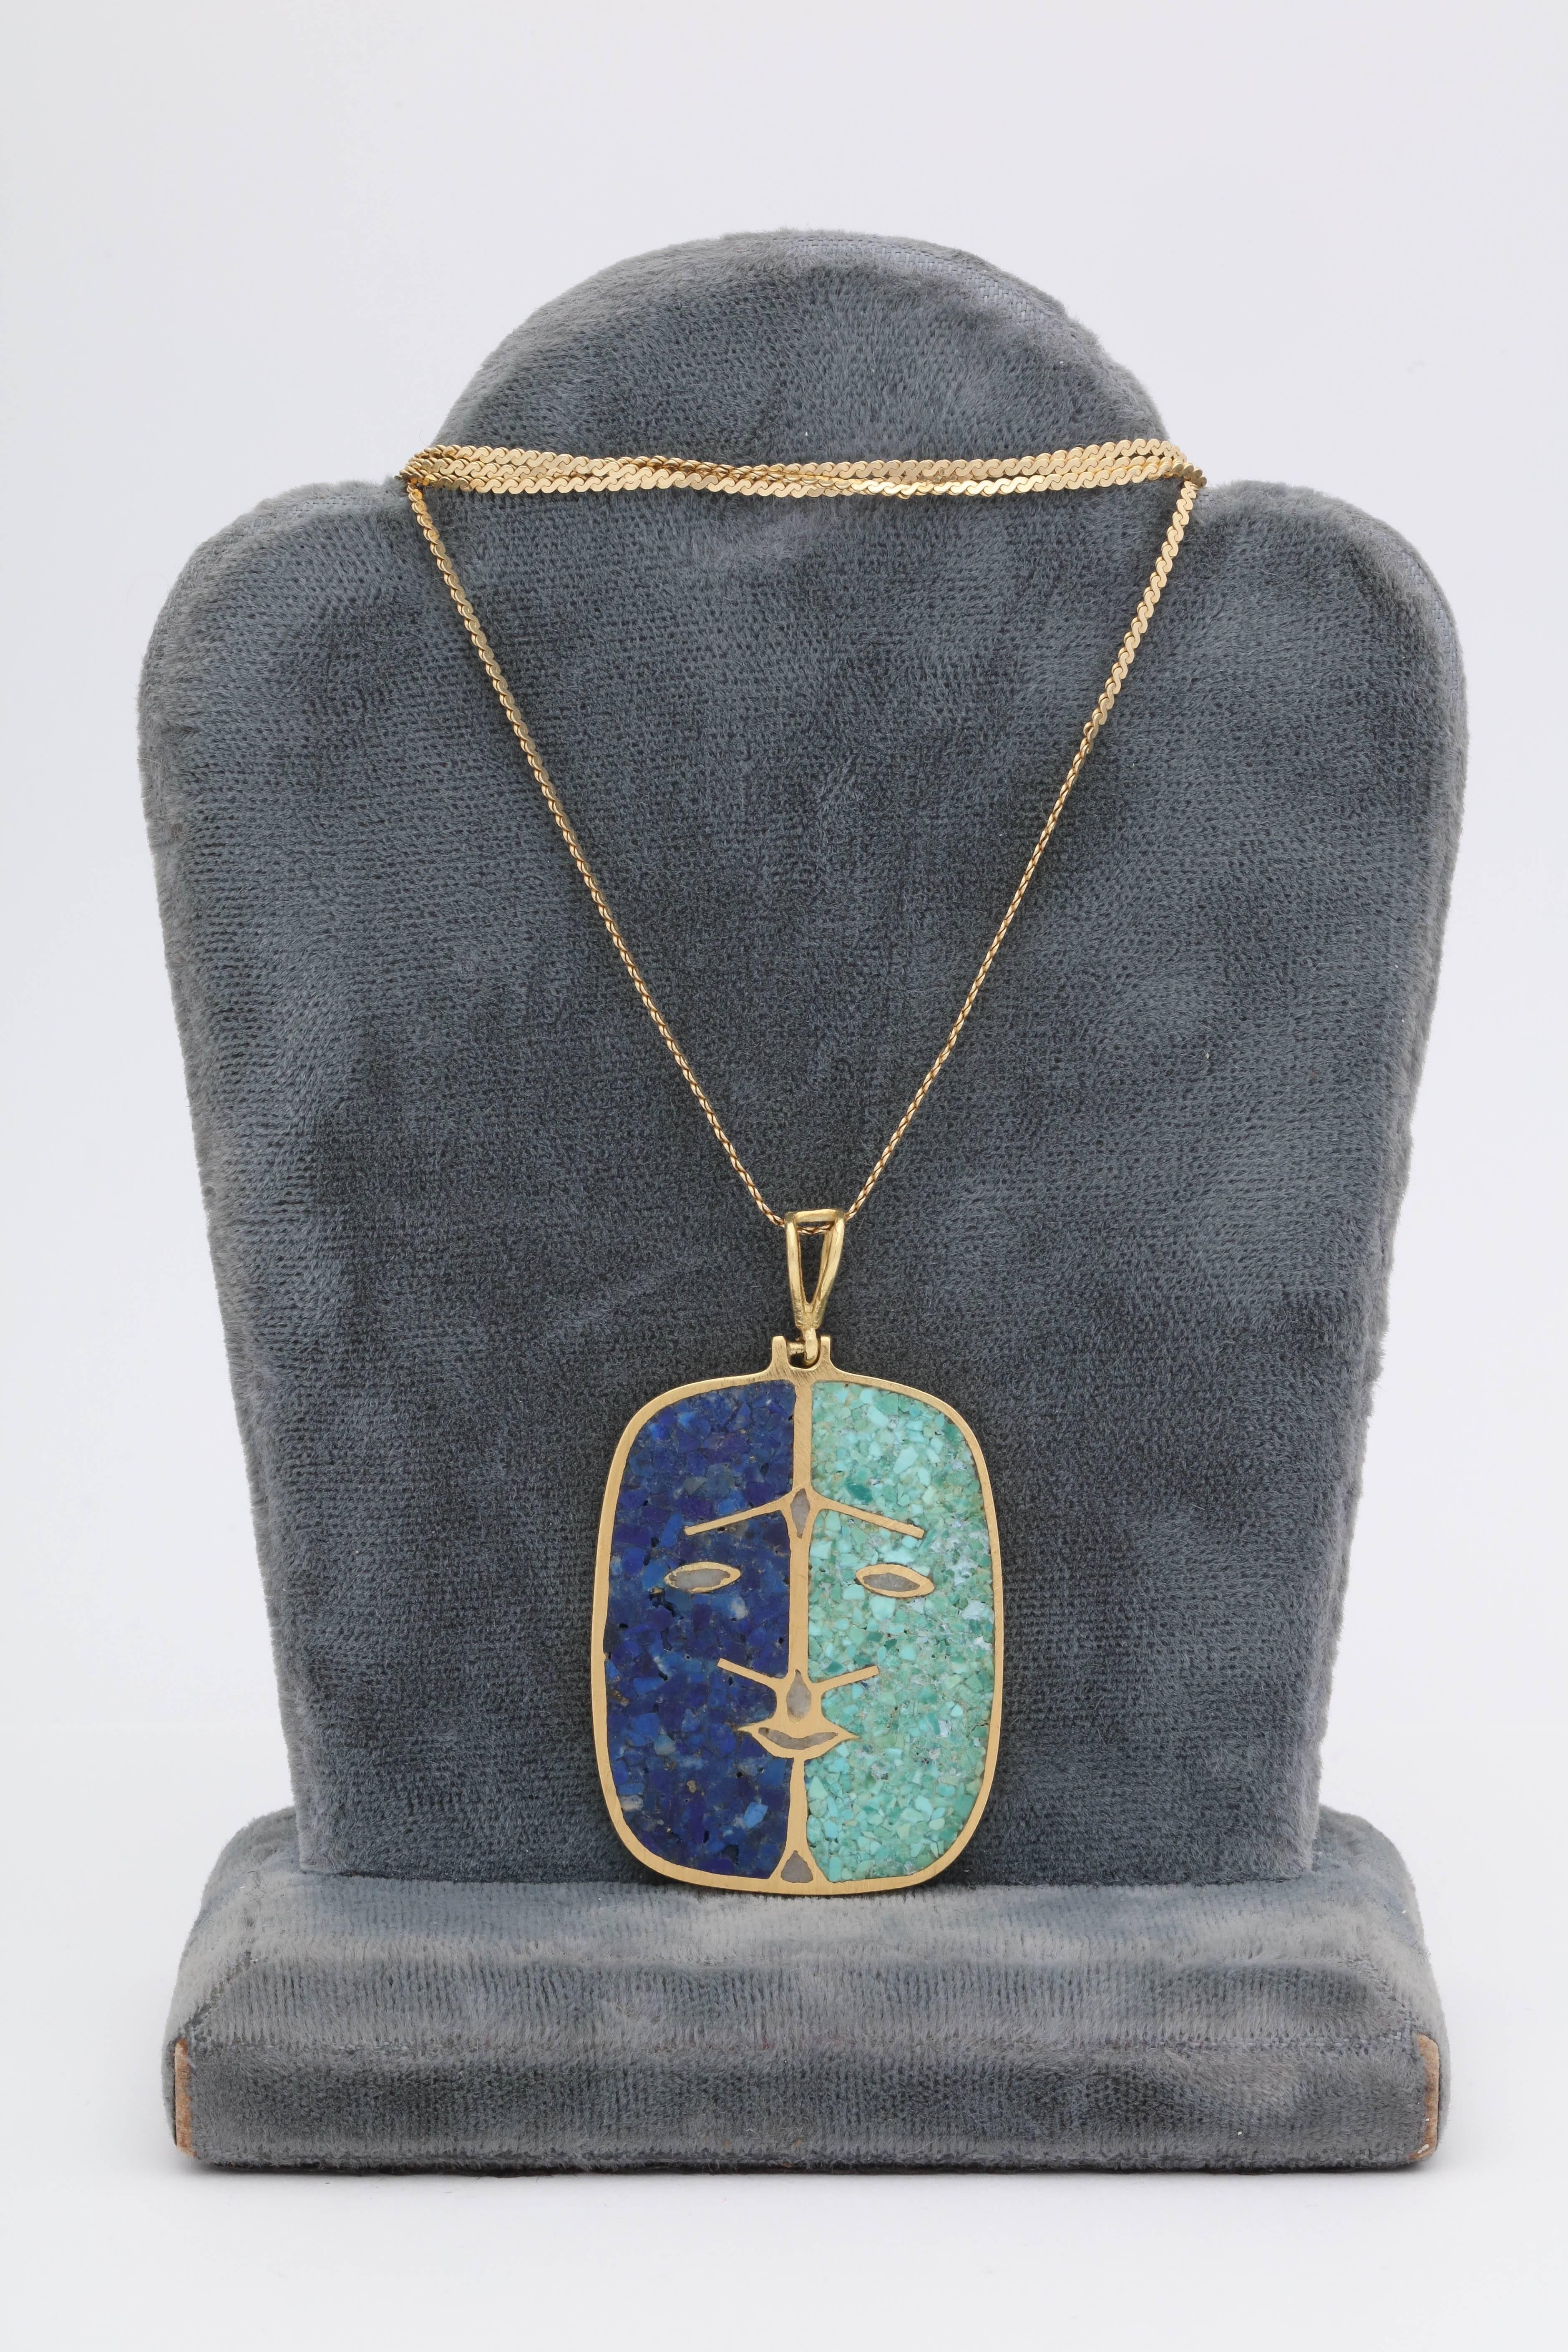 One Unisex Necklace Composed Of A European Made 14kt Yellow Gold Herringbone Chain With A Double Sided Malachite And Lapis Pendant With A Face Detail Design. European Made In The 1970's.